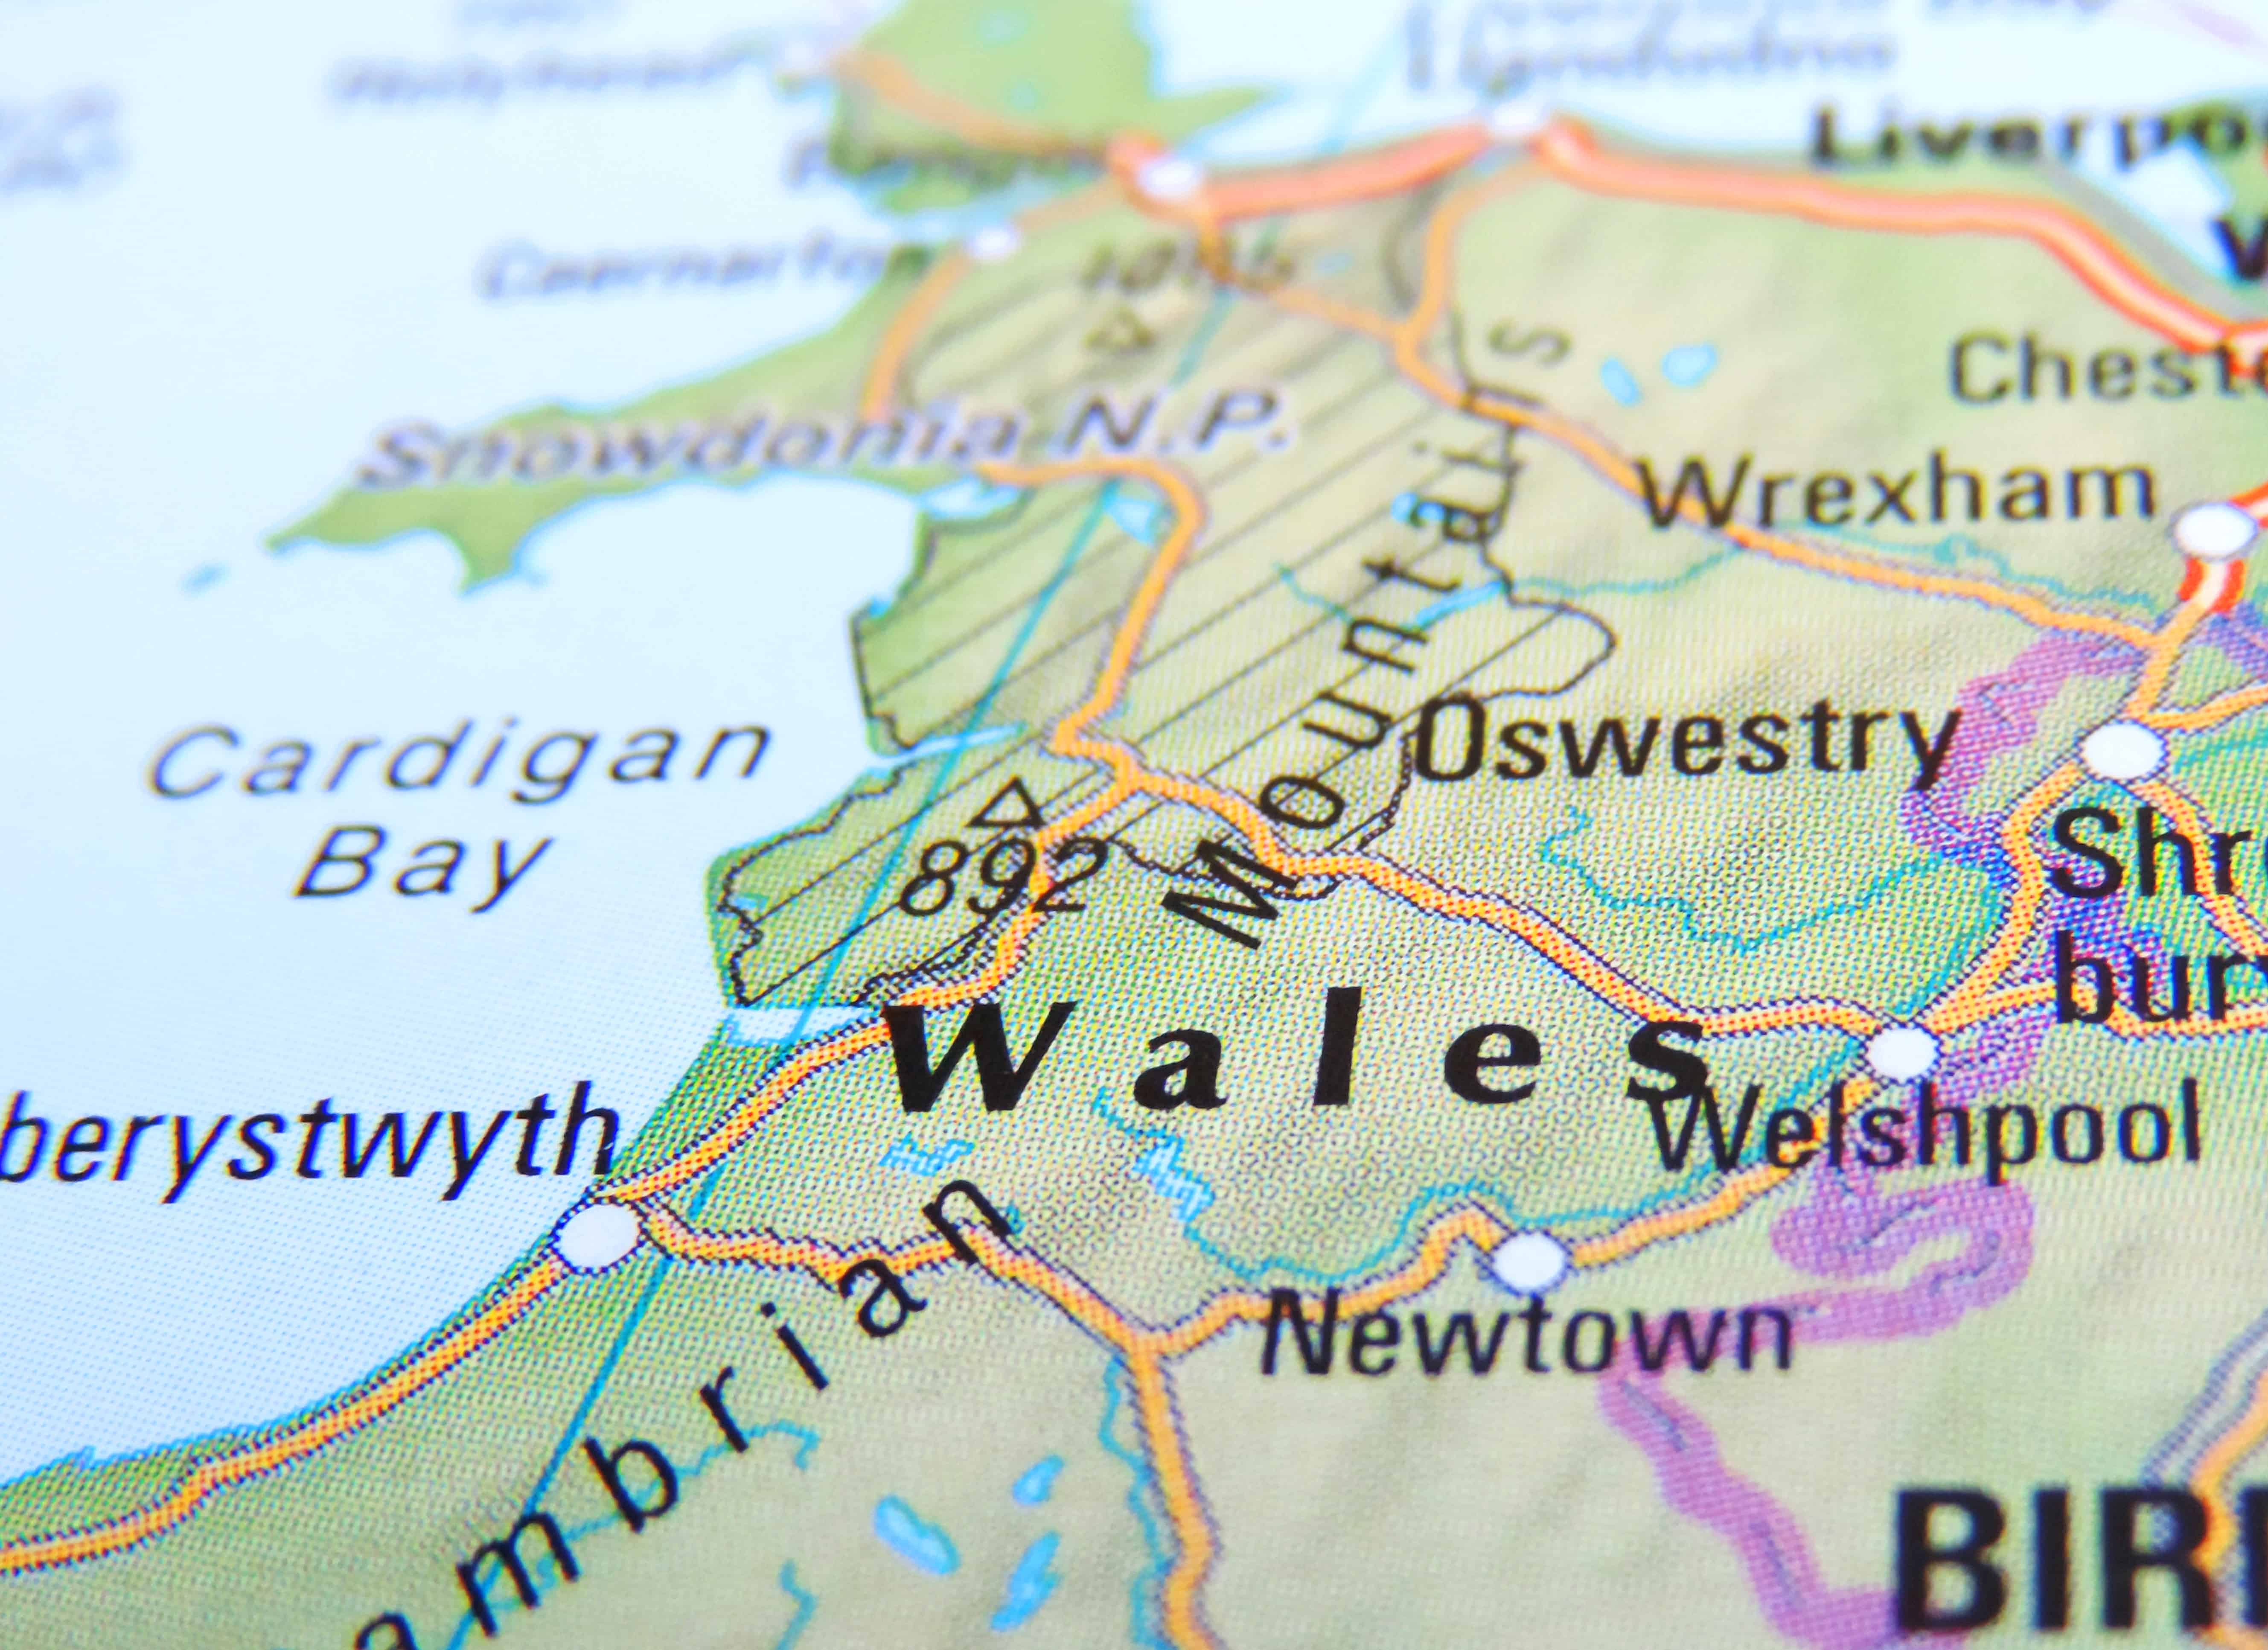 Principality: House prices in Wales reach record high